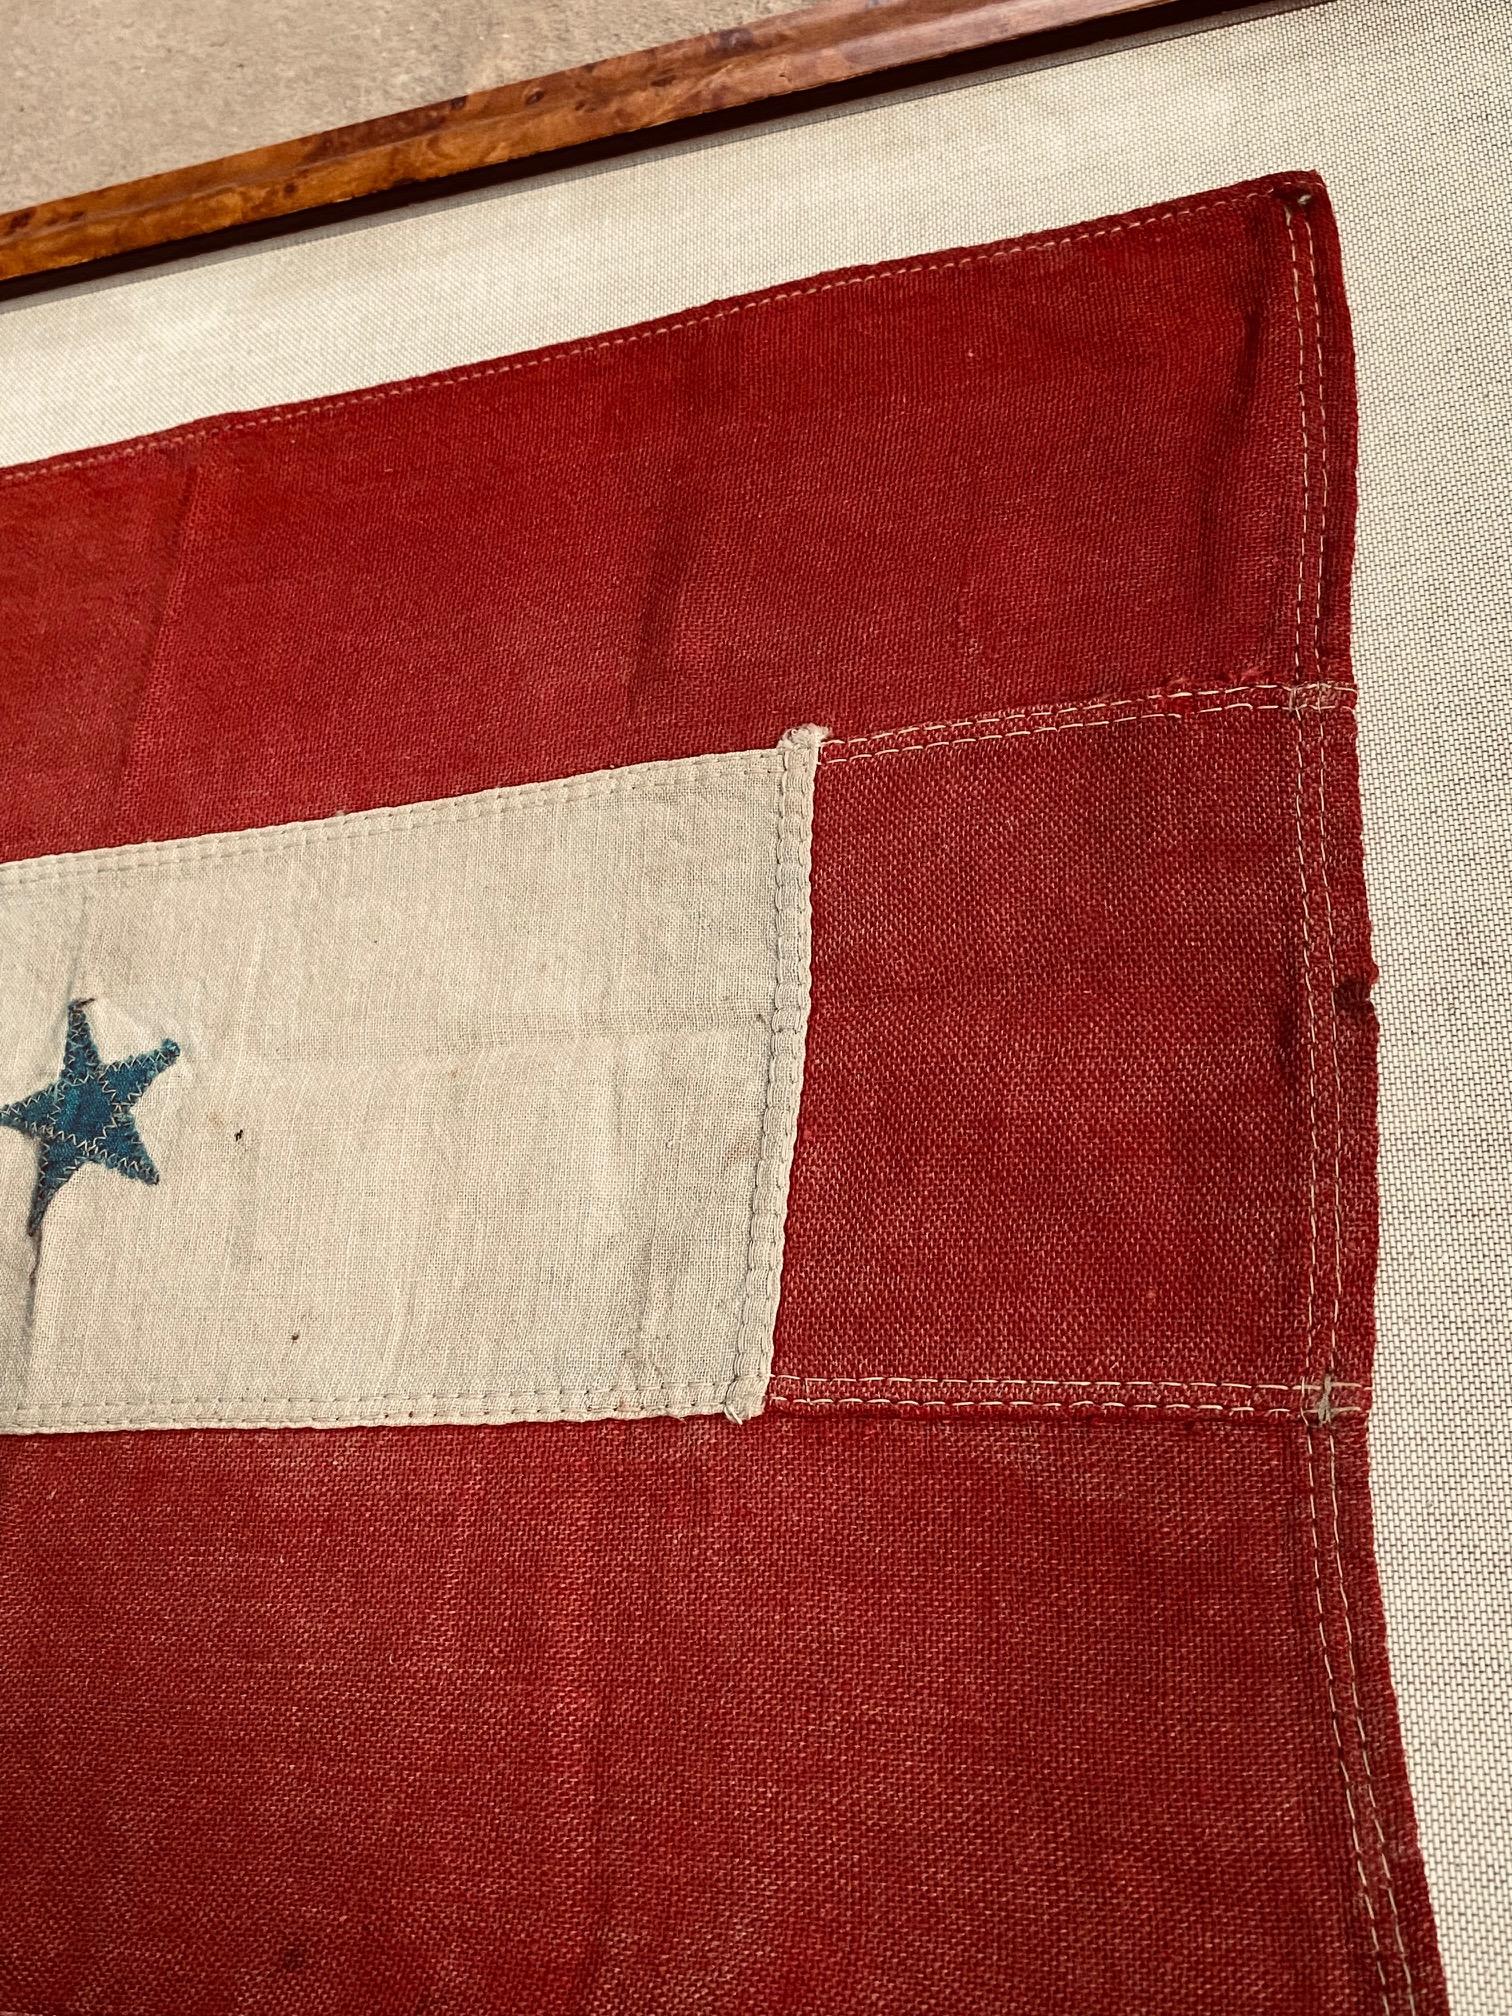 Hand-Crafted Historic American Blue Star Flag, circa 1917